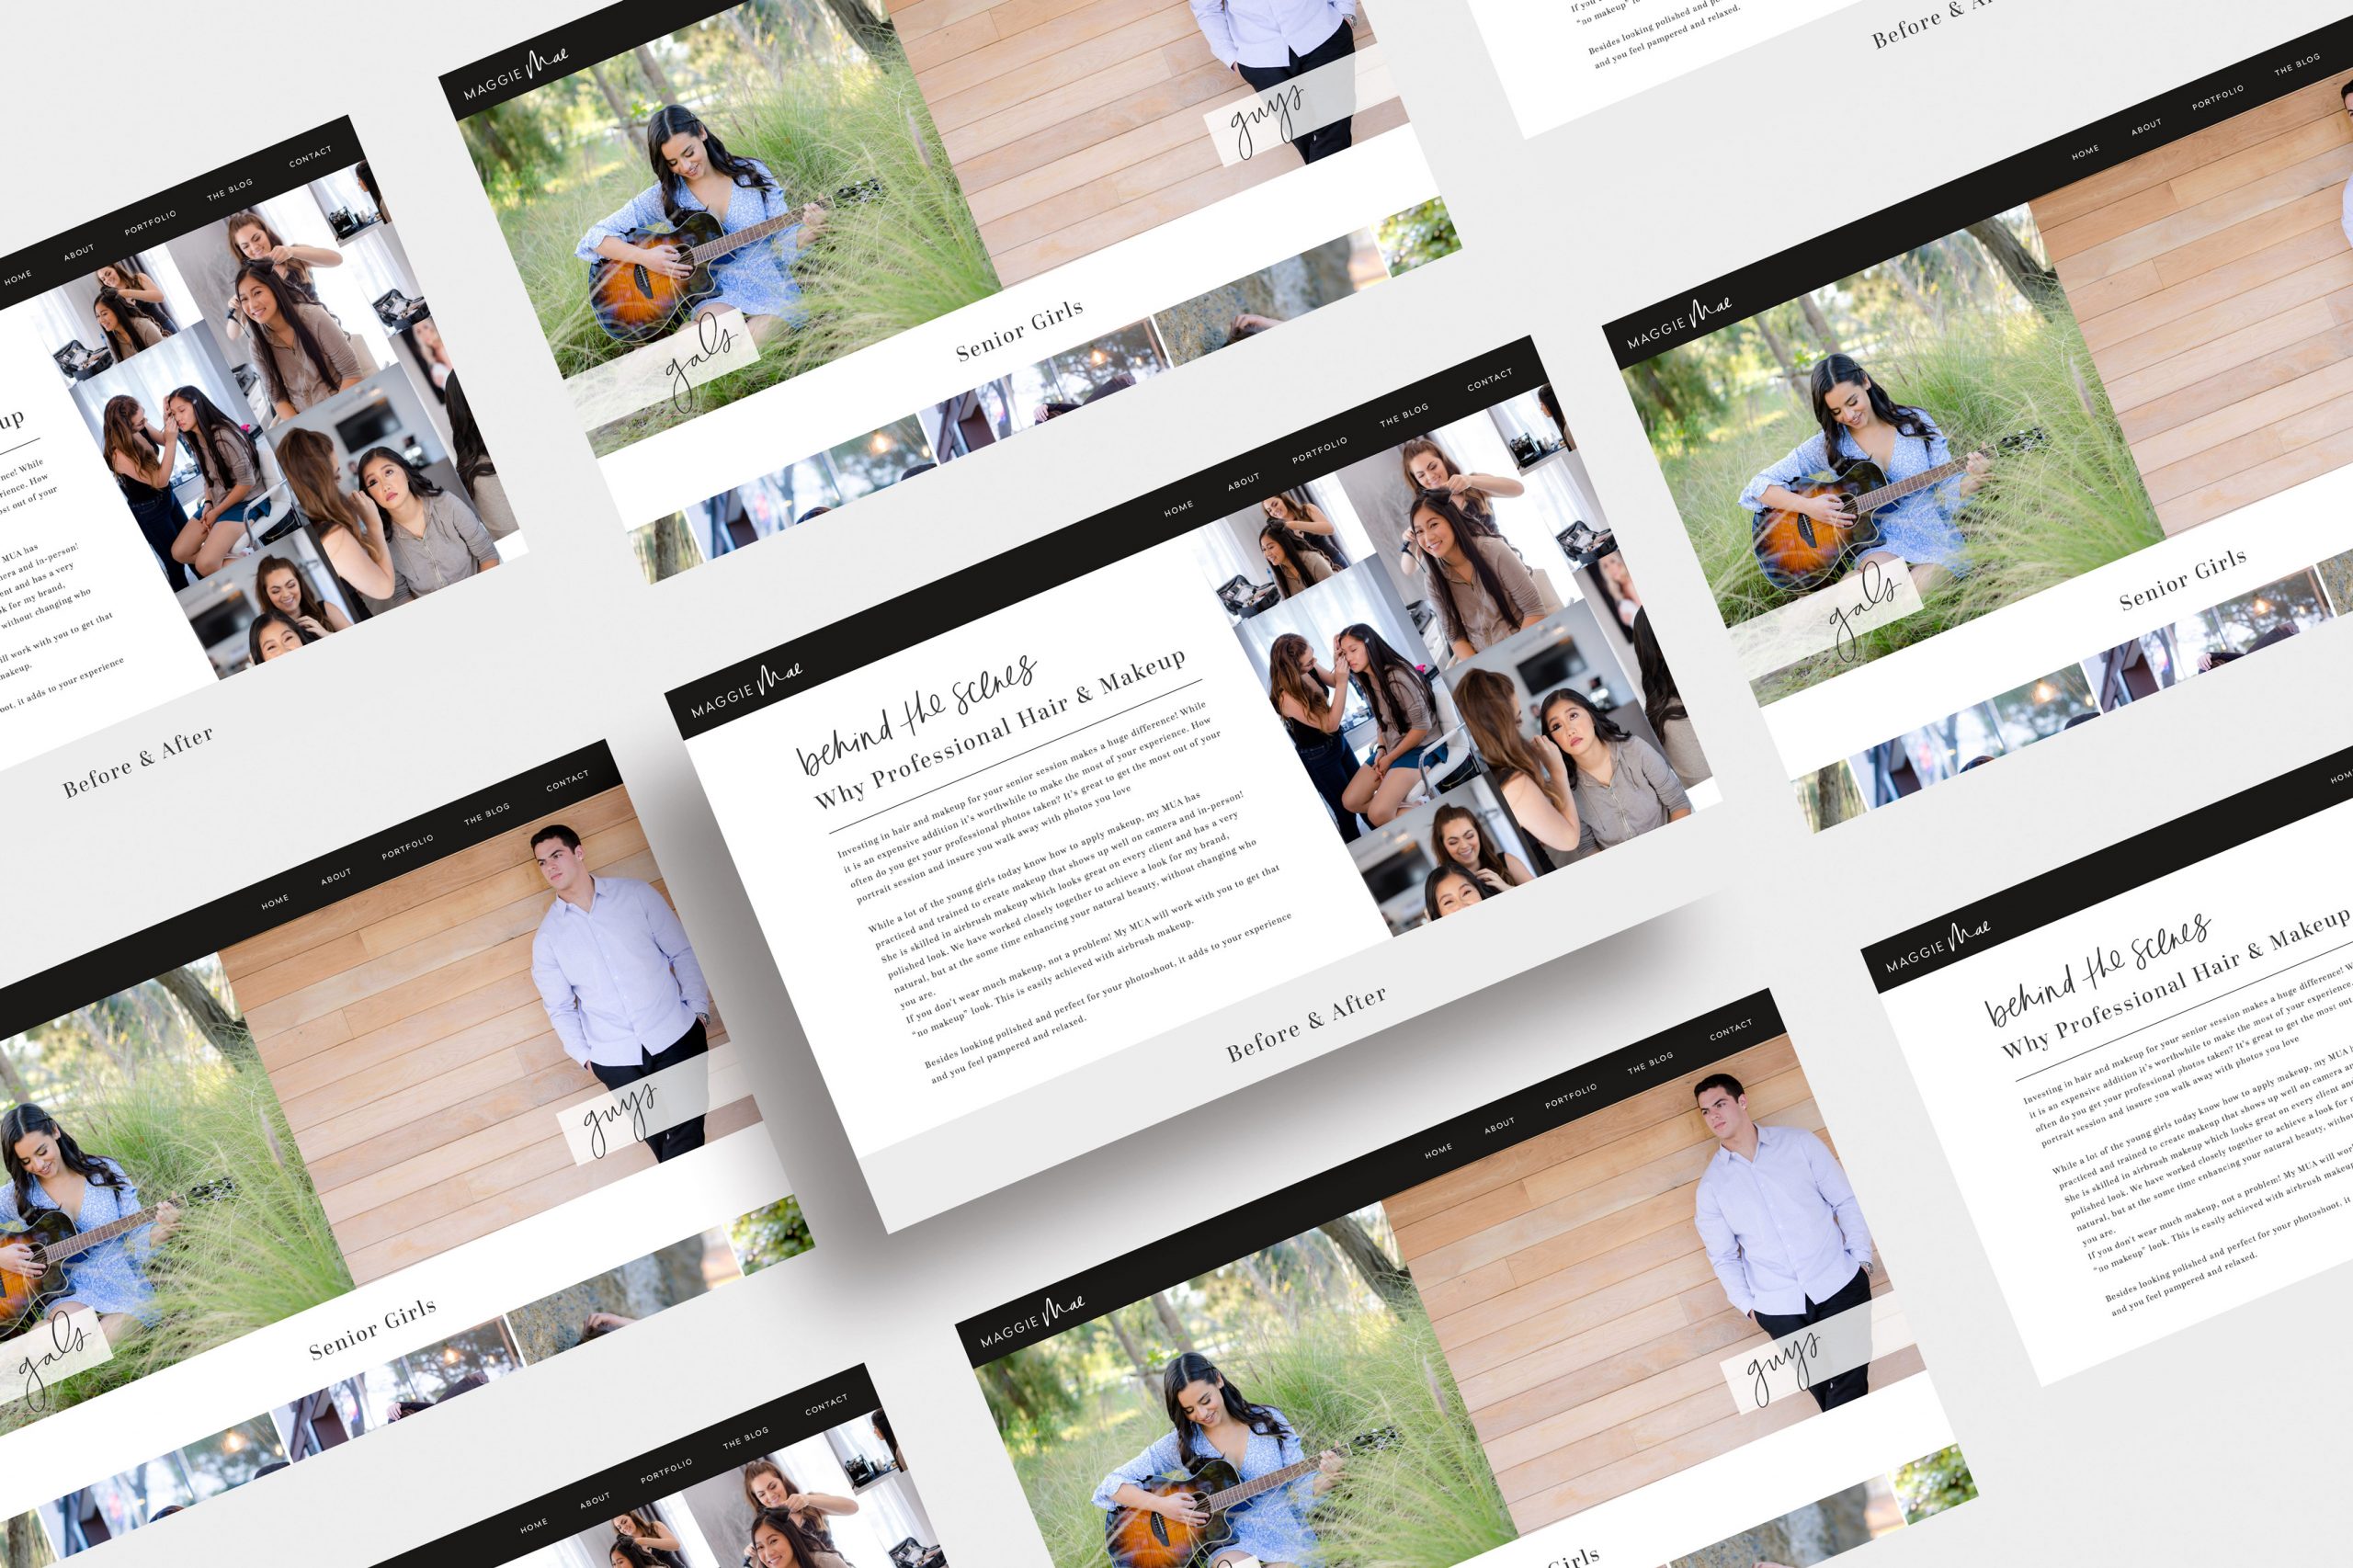 Custom Showit Website Design for Maggie Mae Photography